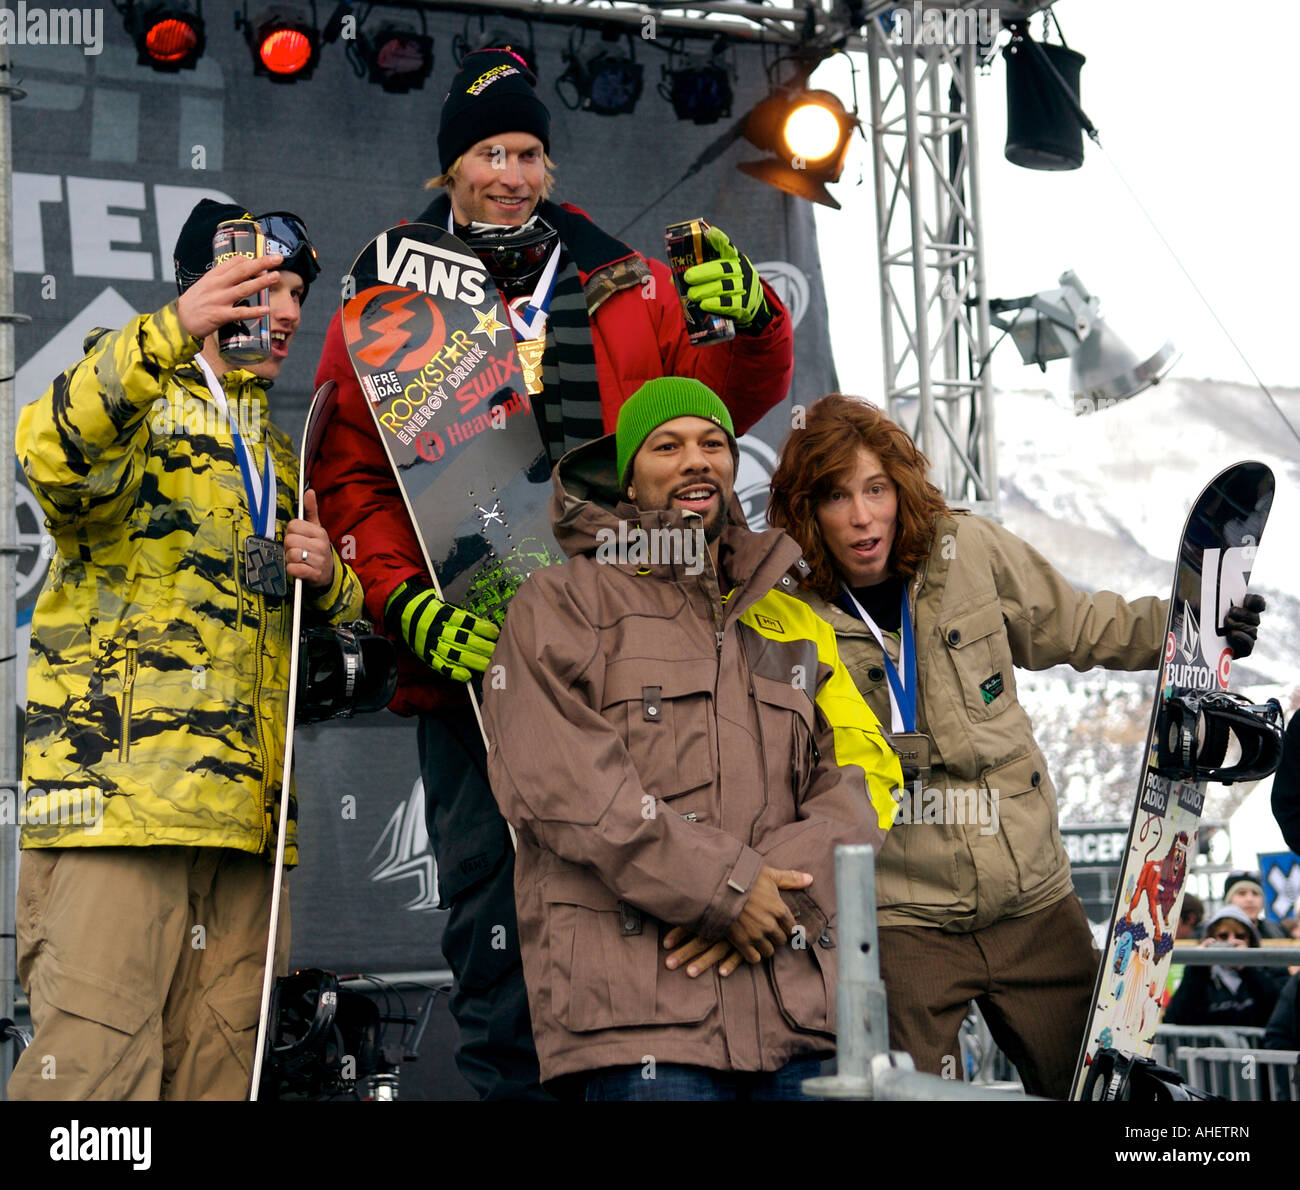 Rapper Common poses with Andreas Wiig, Jussi Oksanen, and Shaun White at the 2007 ESPN Winter X Games in Aspen, Colorado, USA Stock Photo